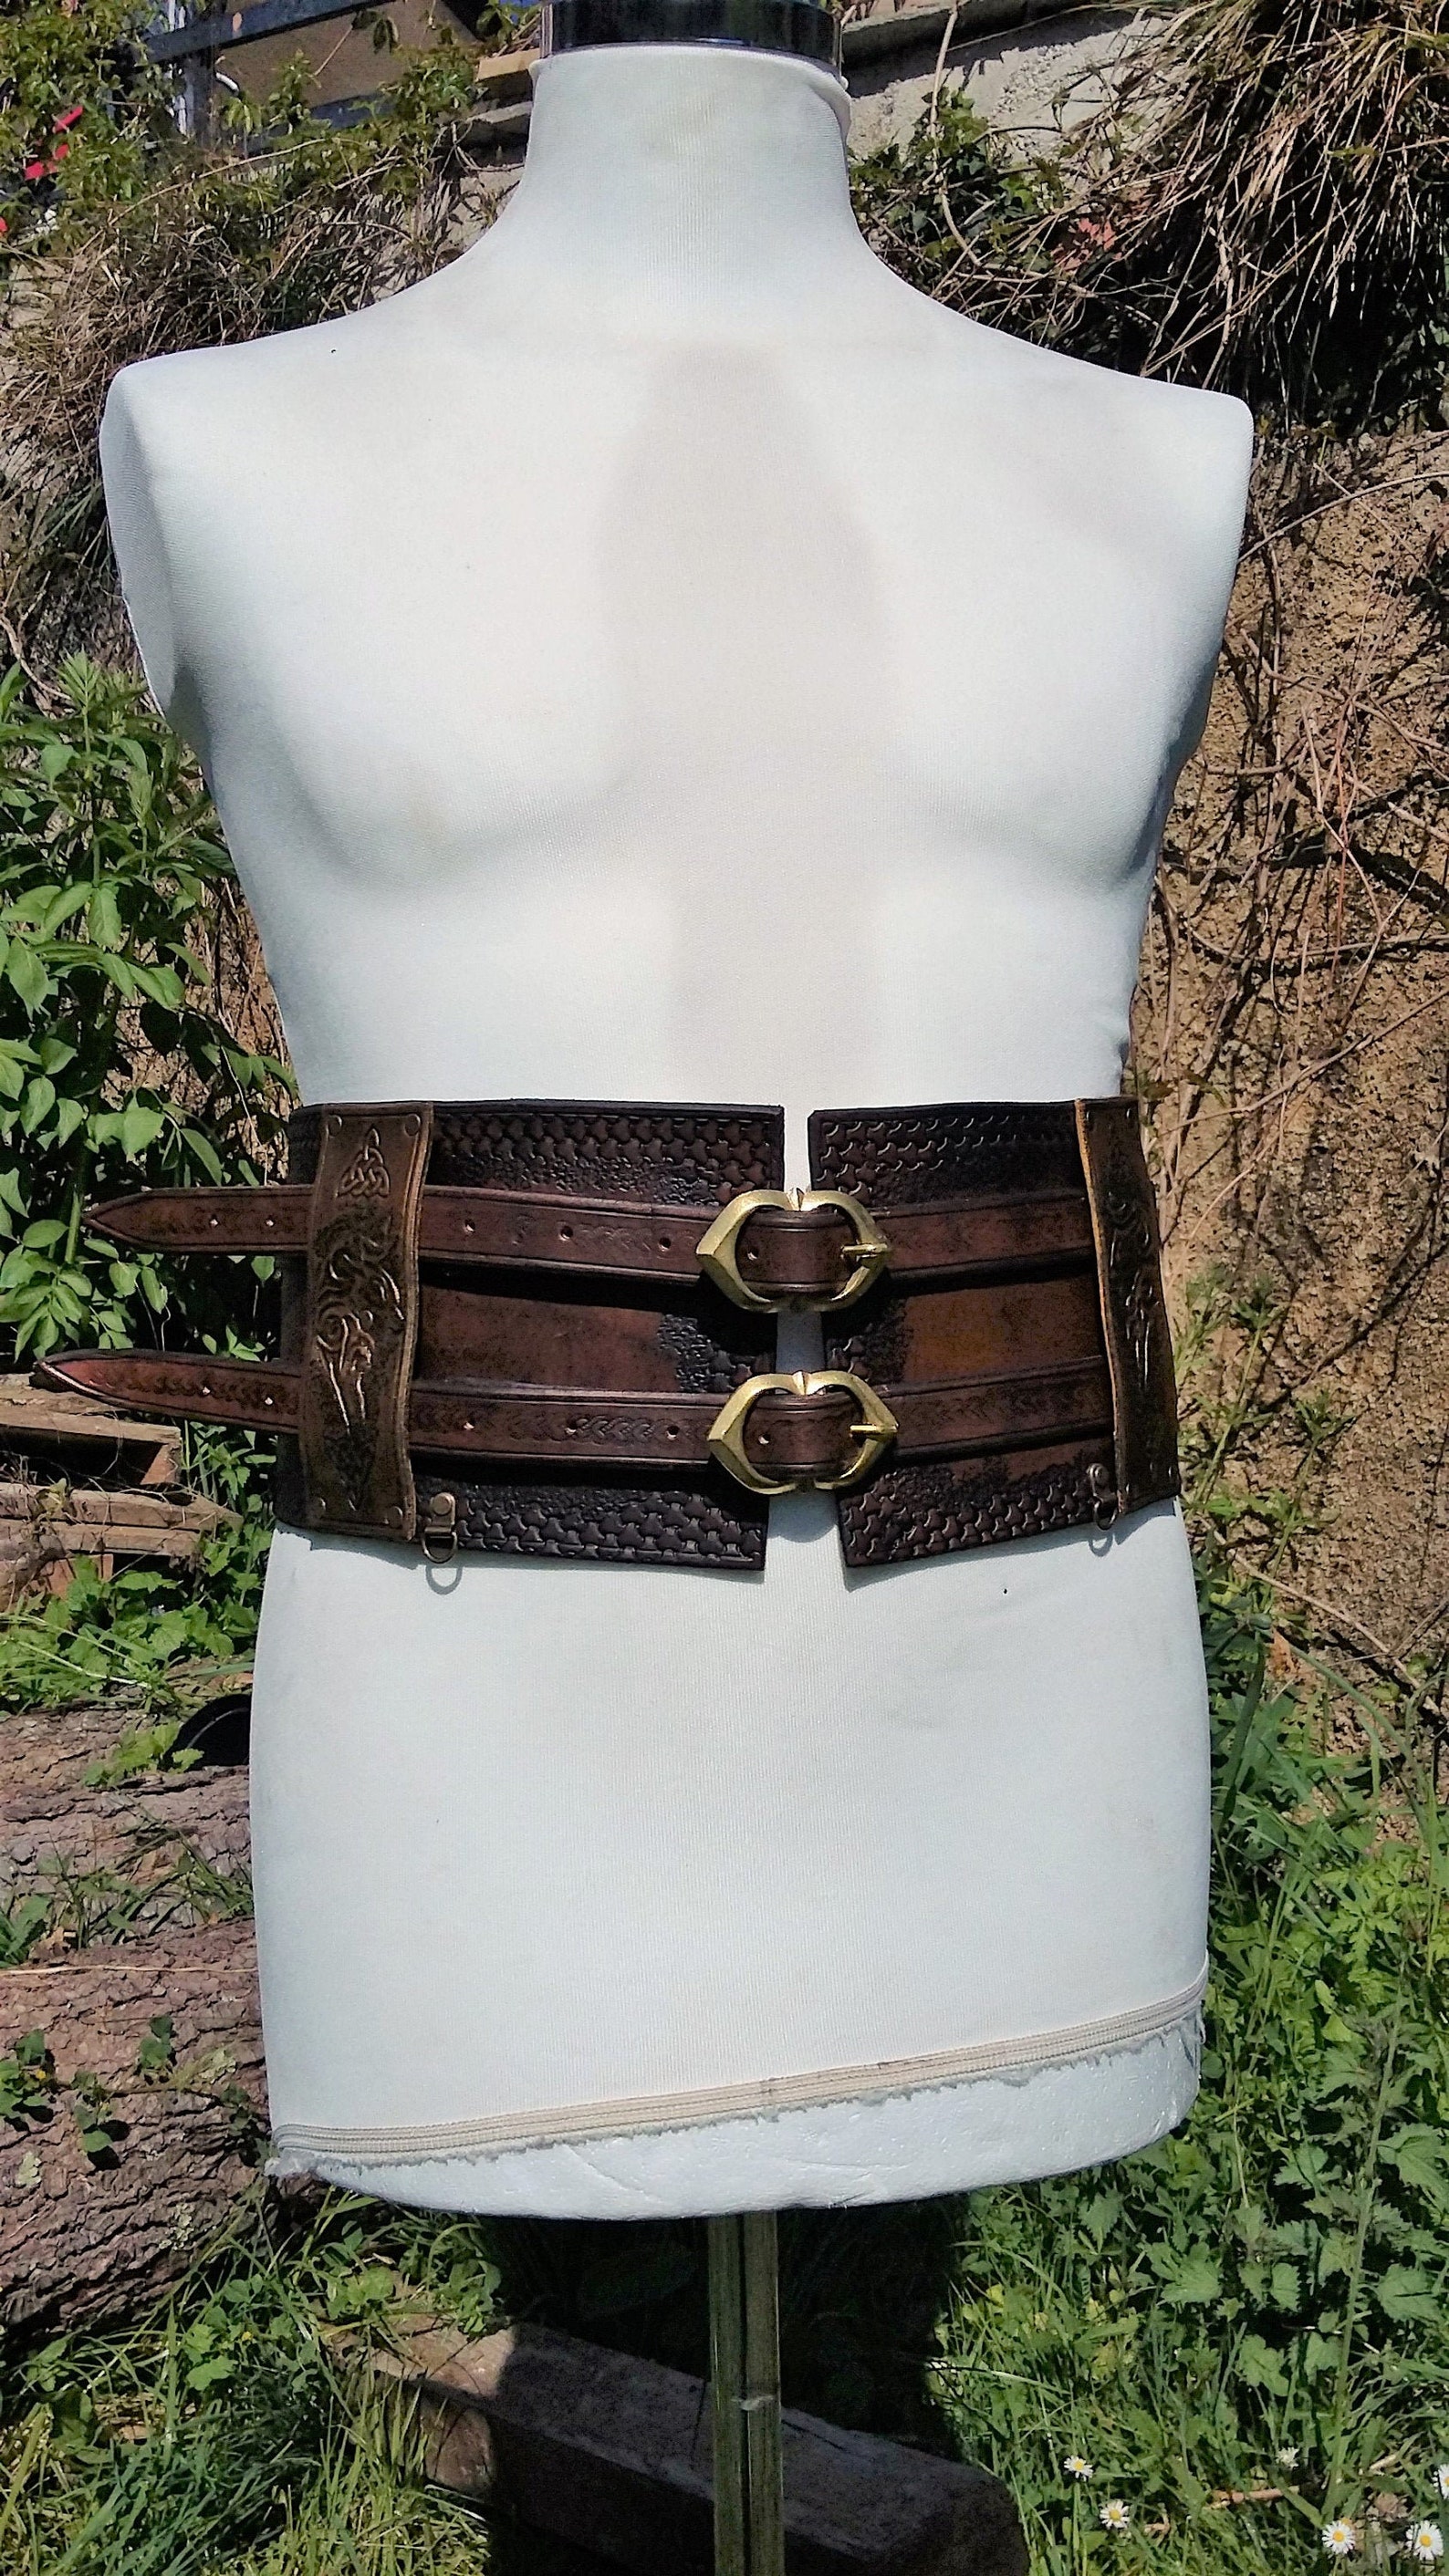 PIRATE Belt With Double Buckle and Celtic Decorations Warrior - Etsy